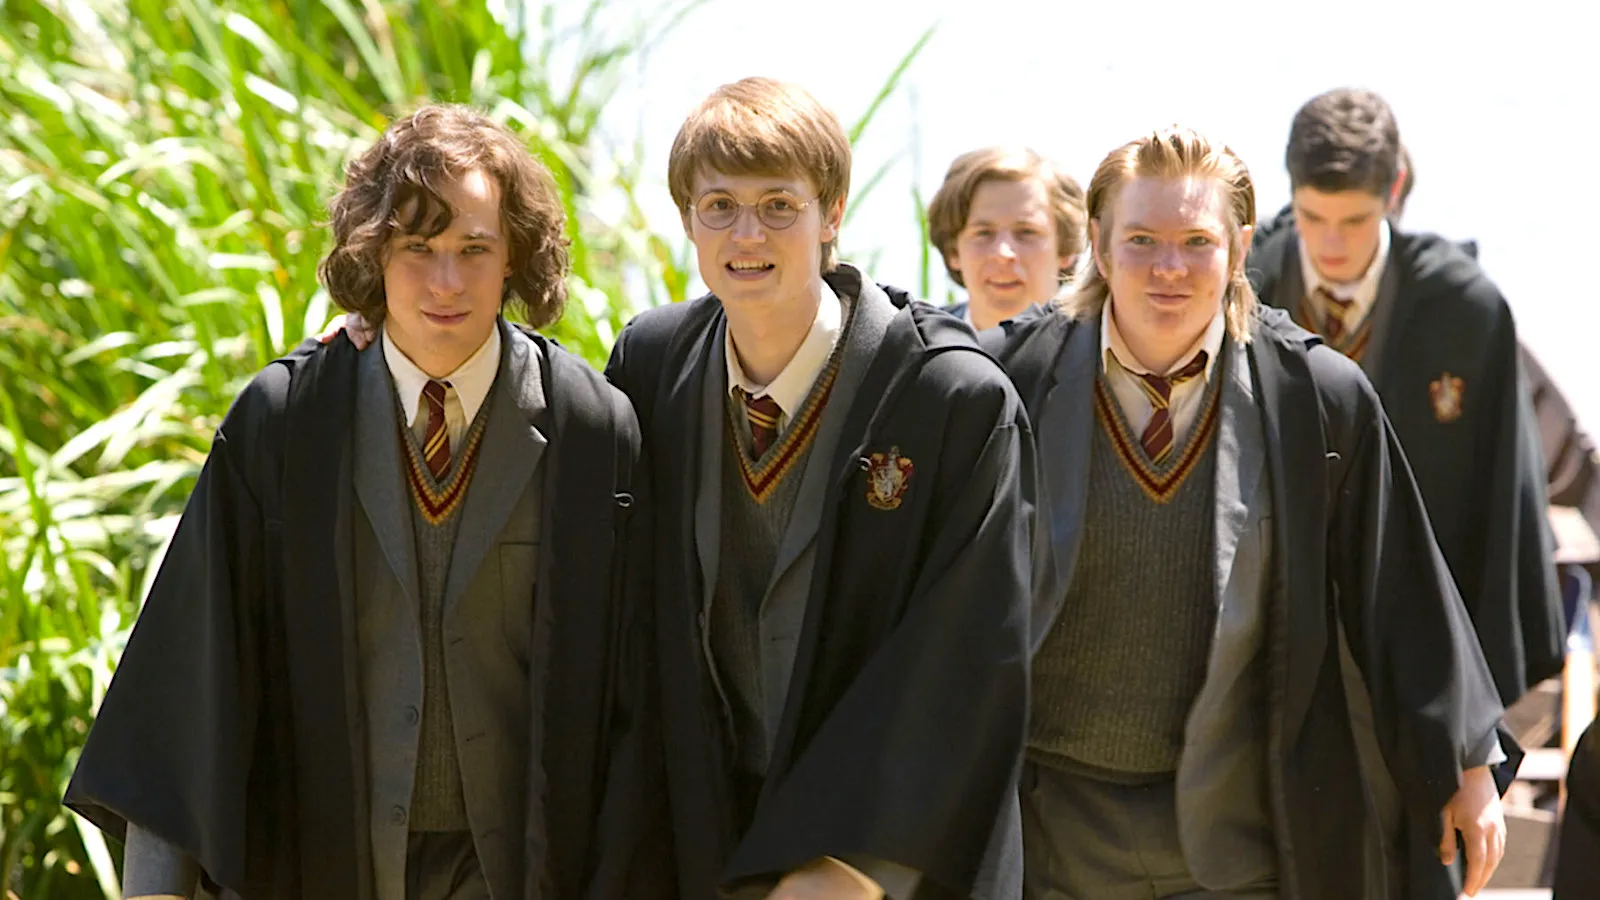 Young Sirius, James, Wormtail, and Lupin in 'Harry Potter and the Order of the Phoenix'